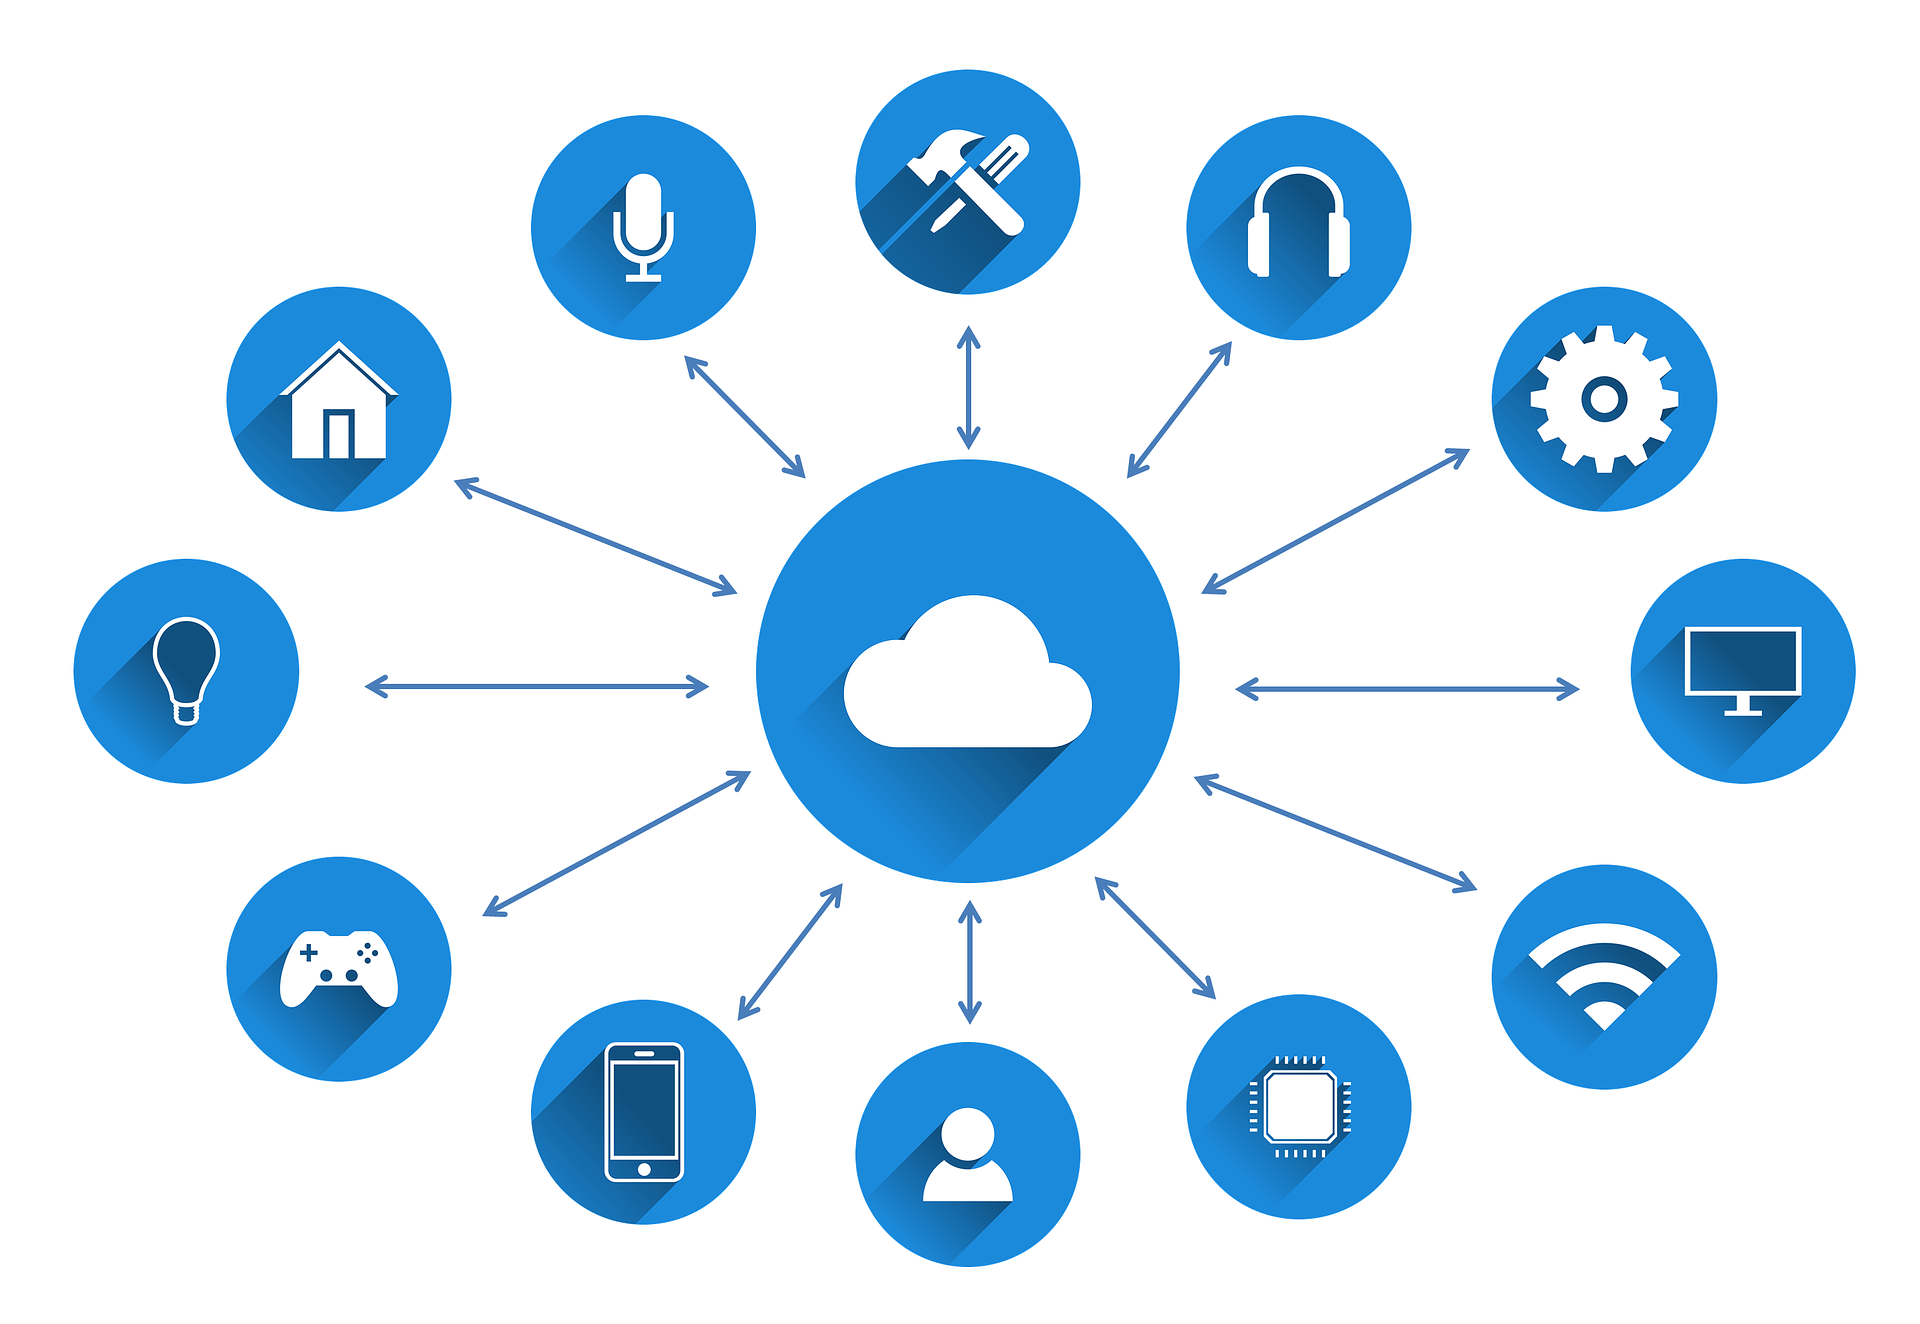 Internet of Things Software Development